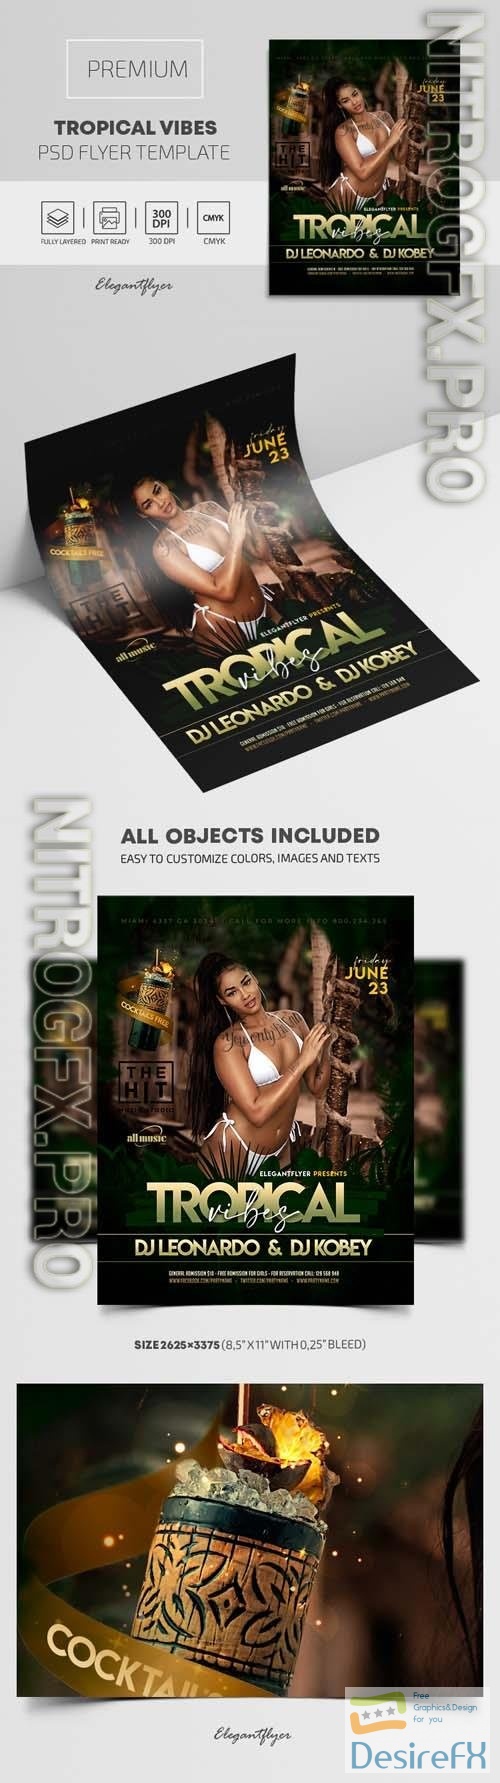 Tropical Vibes Premium PSD Flyer Template